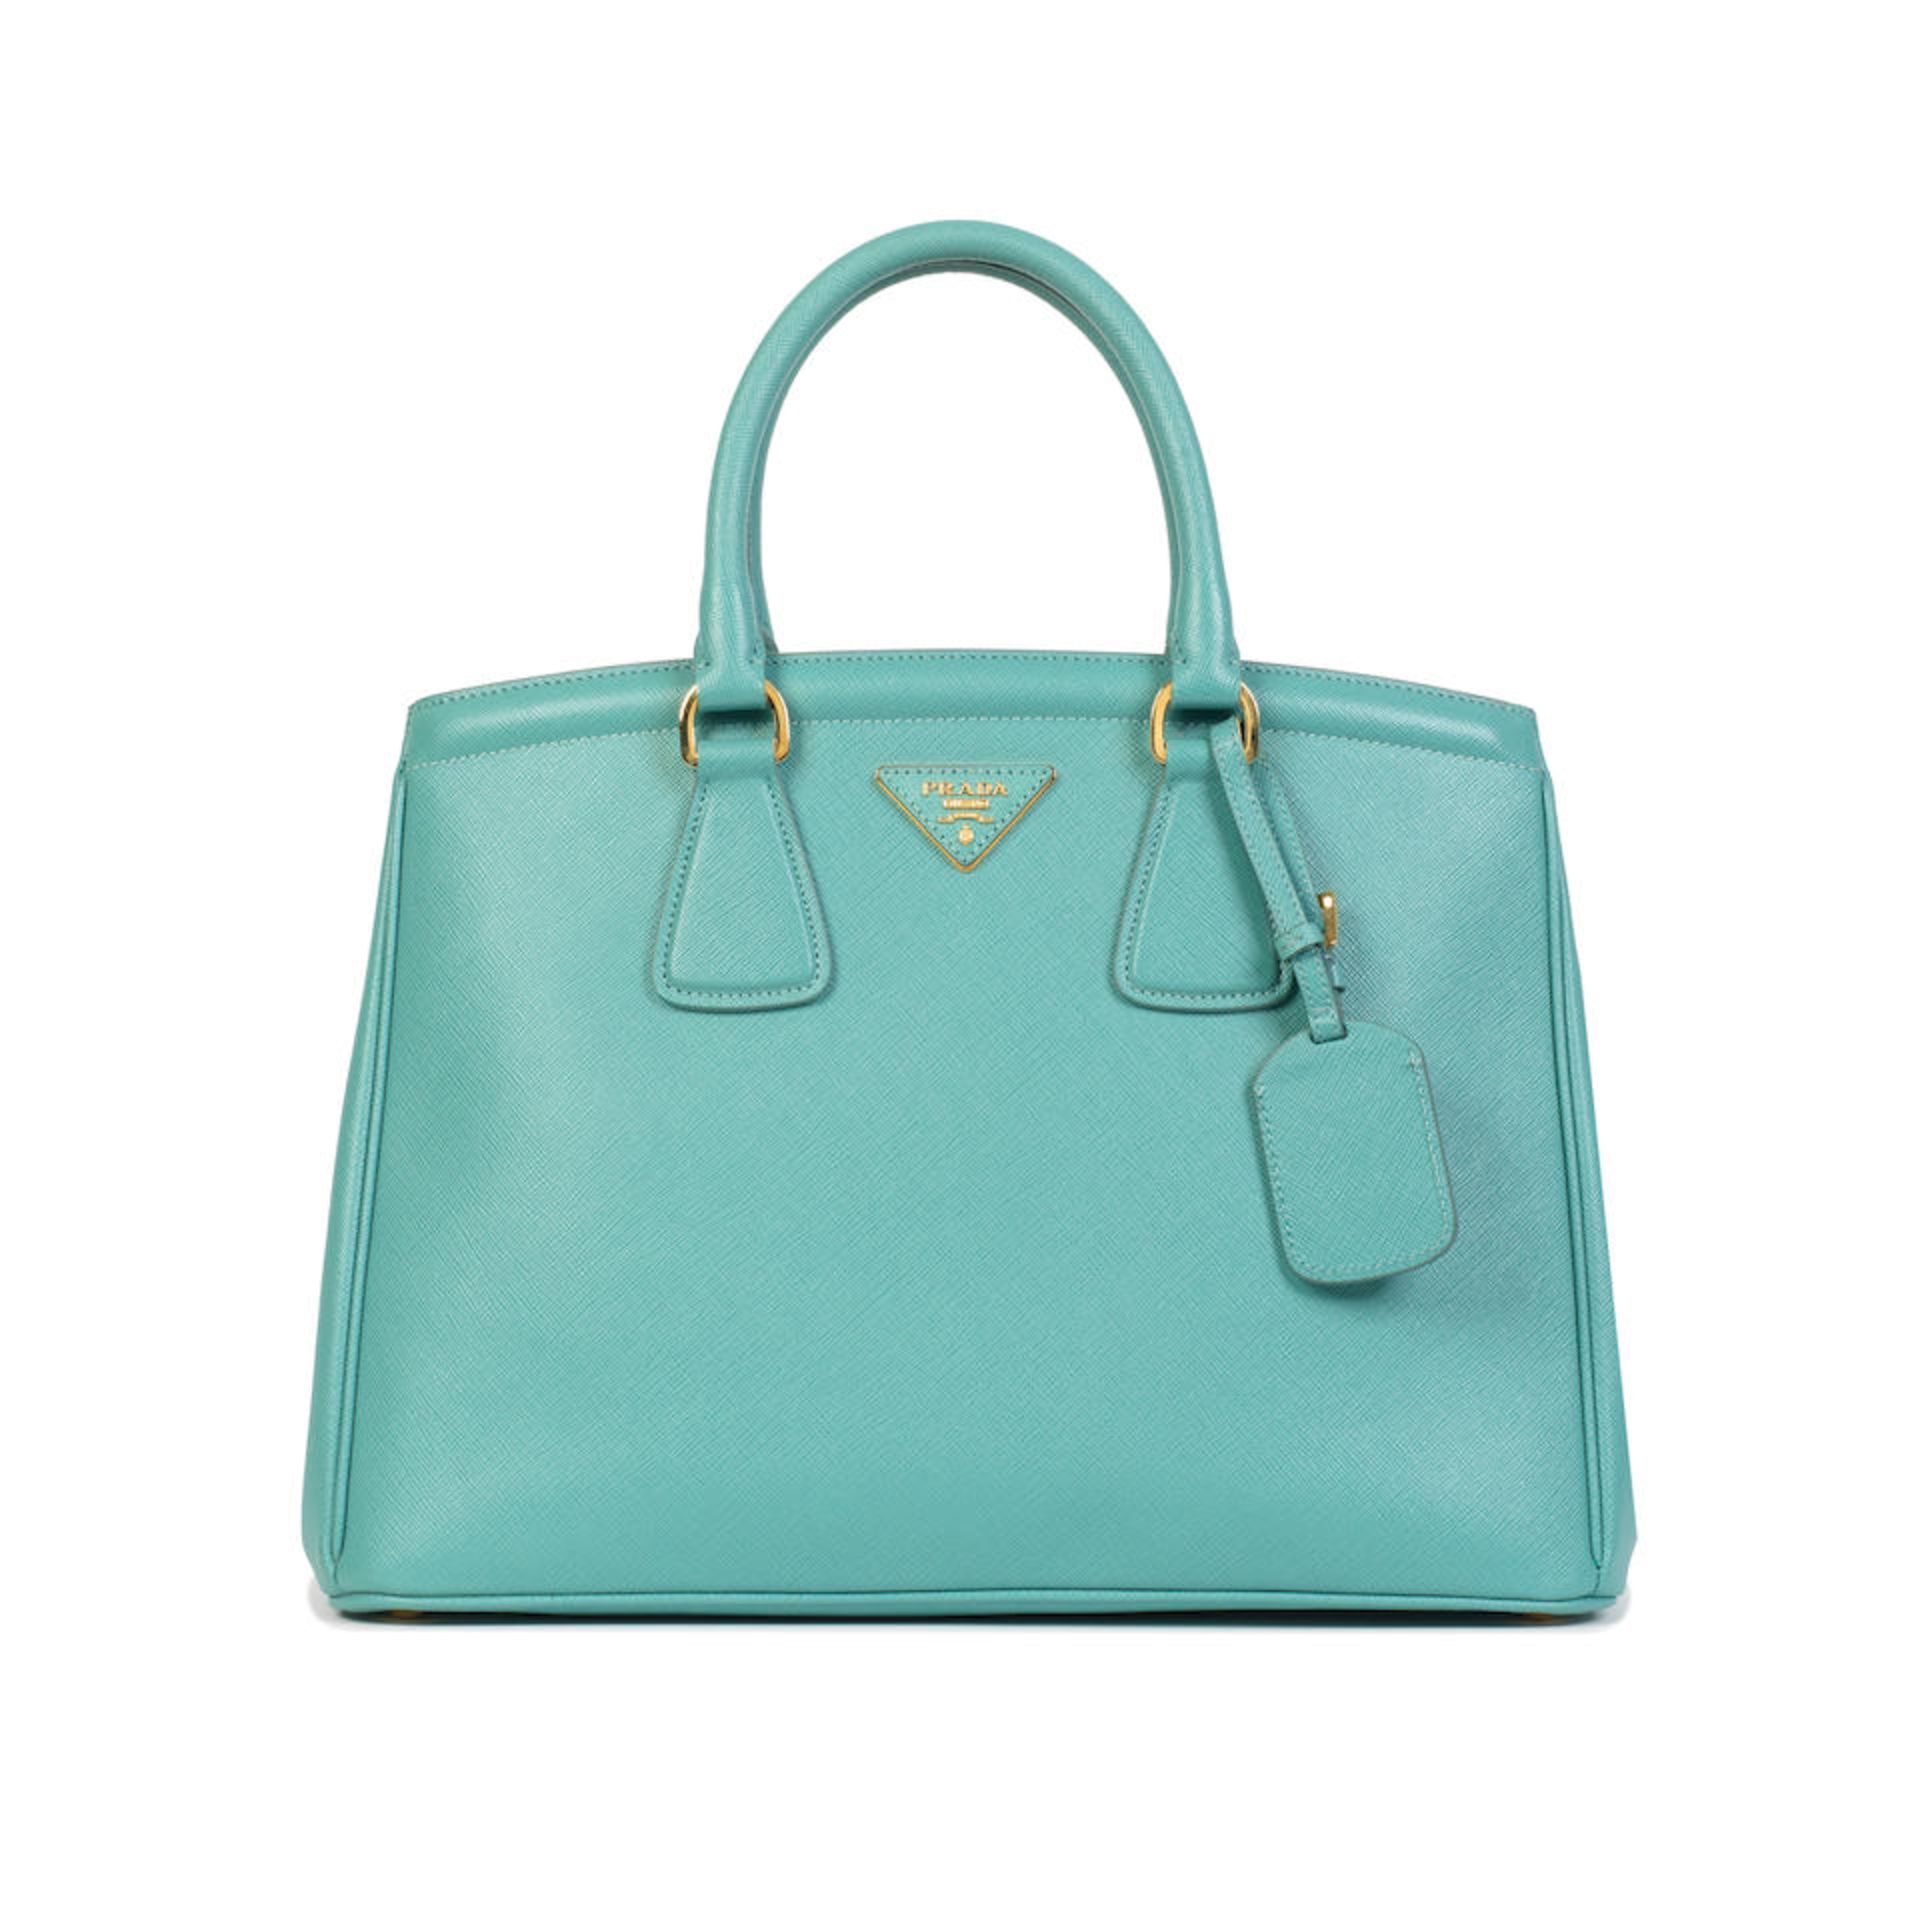 Prada: a Pale Blue Saffiano Lux Leather Tote Bag (includes authenticity card and dust bag)